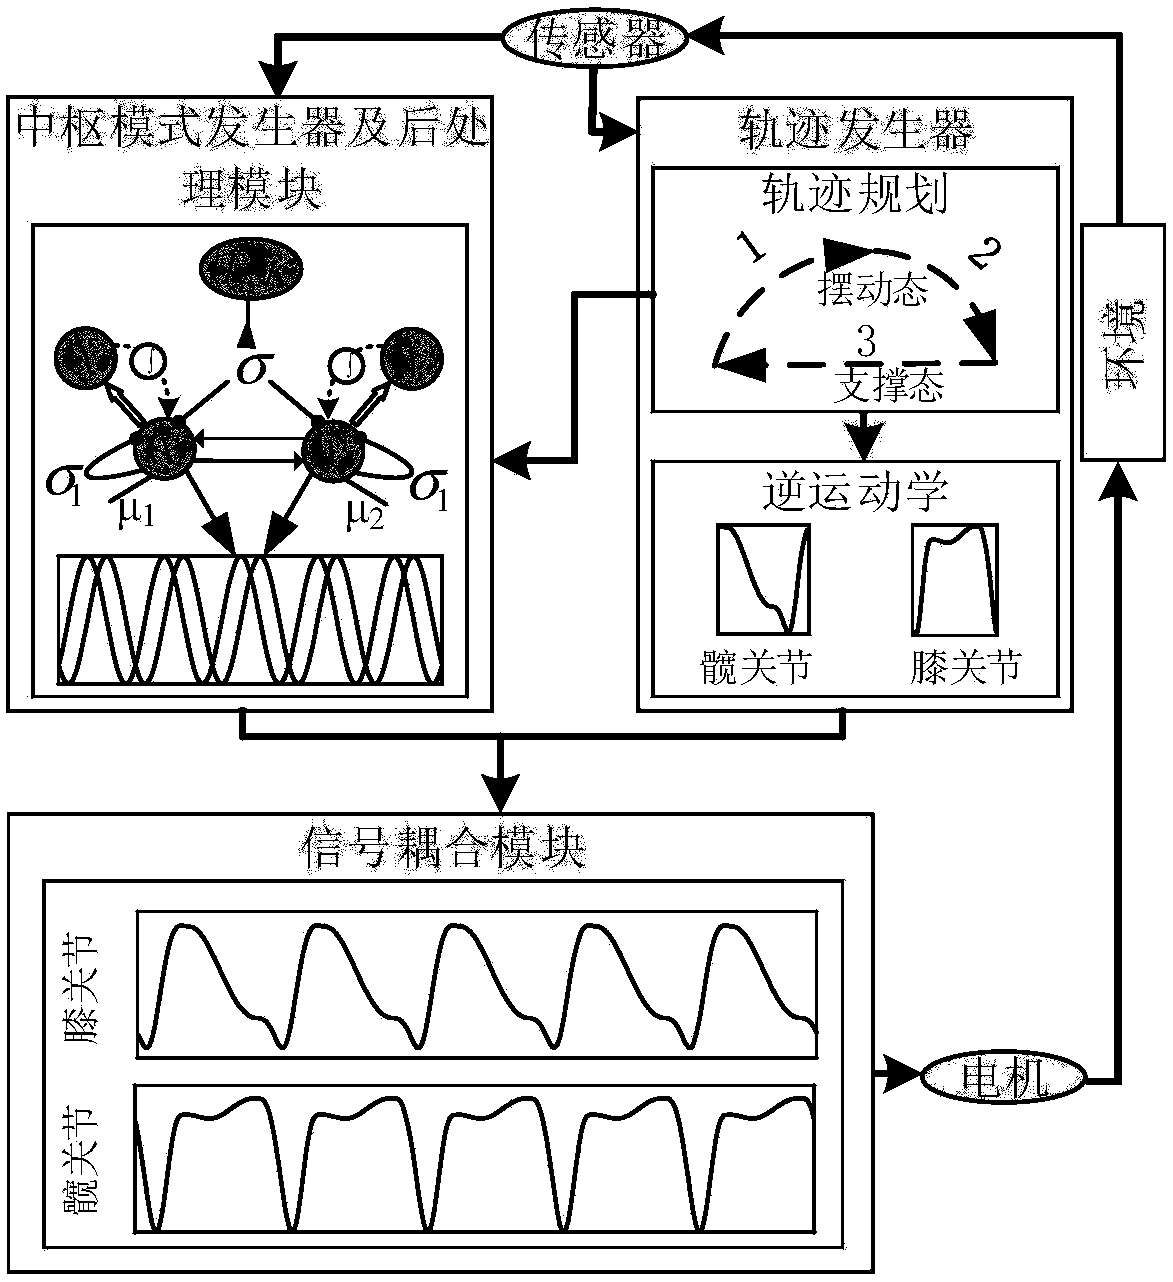 Movement control method for quadruped robot based on central pattern generator